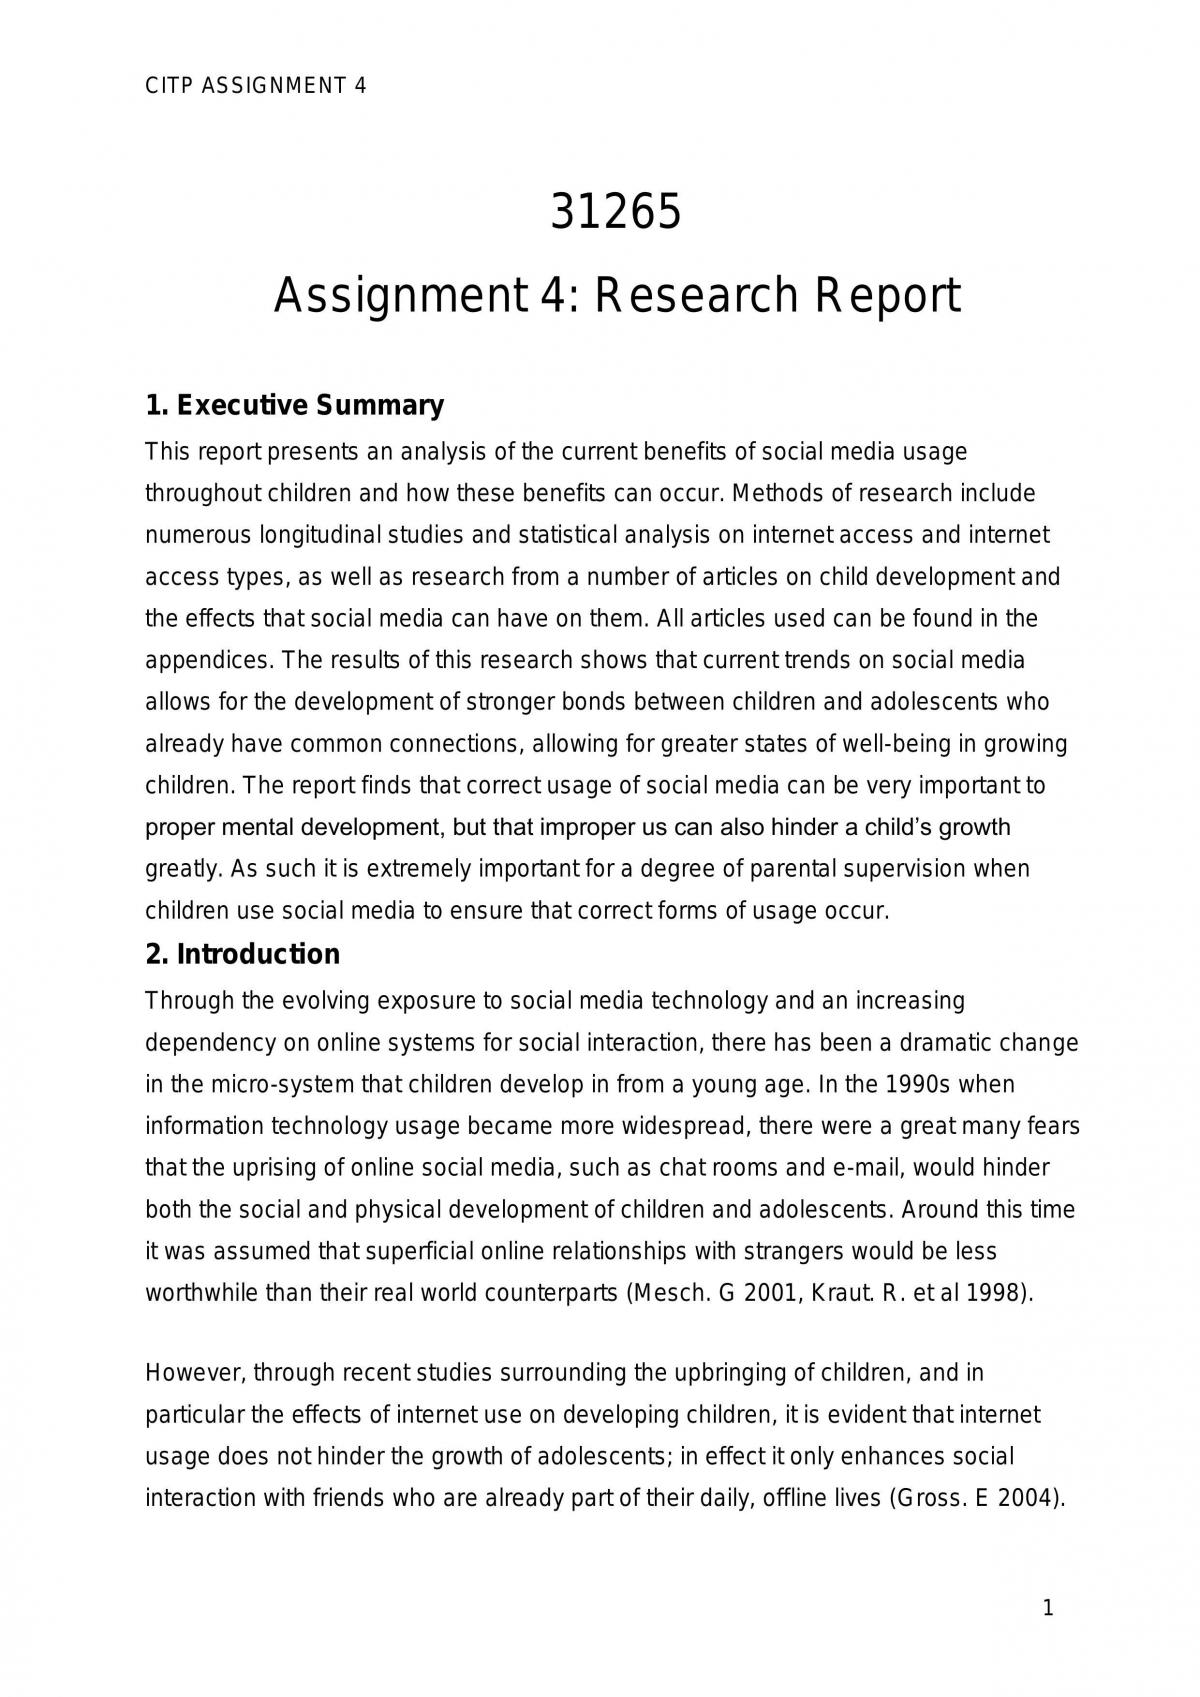 the final research report is not